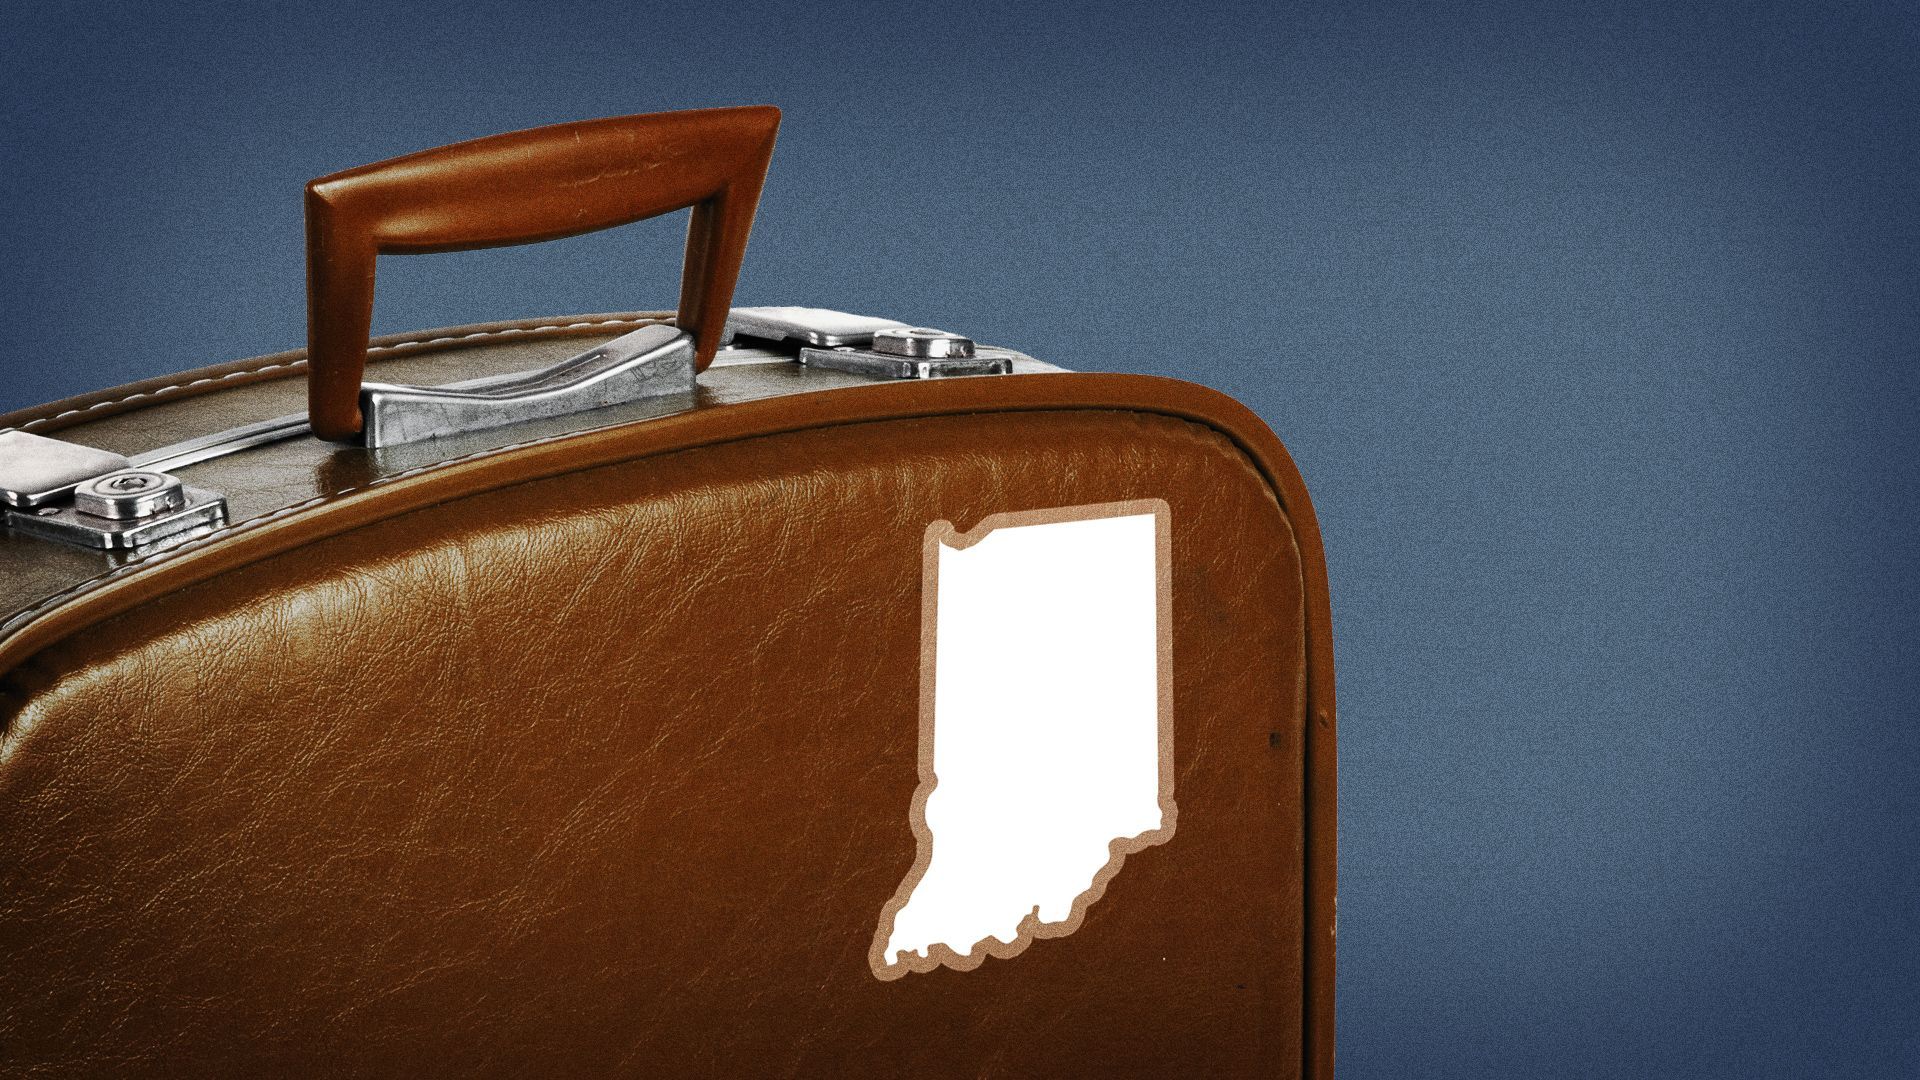 Illustration of a suitcase with a sticker shaped like Indiana.